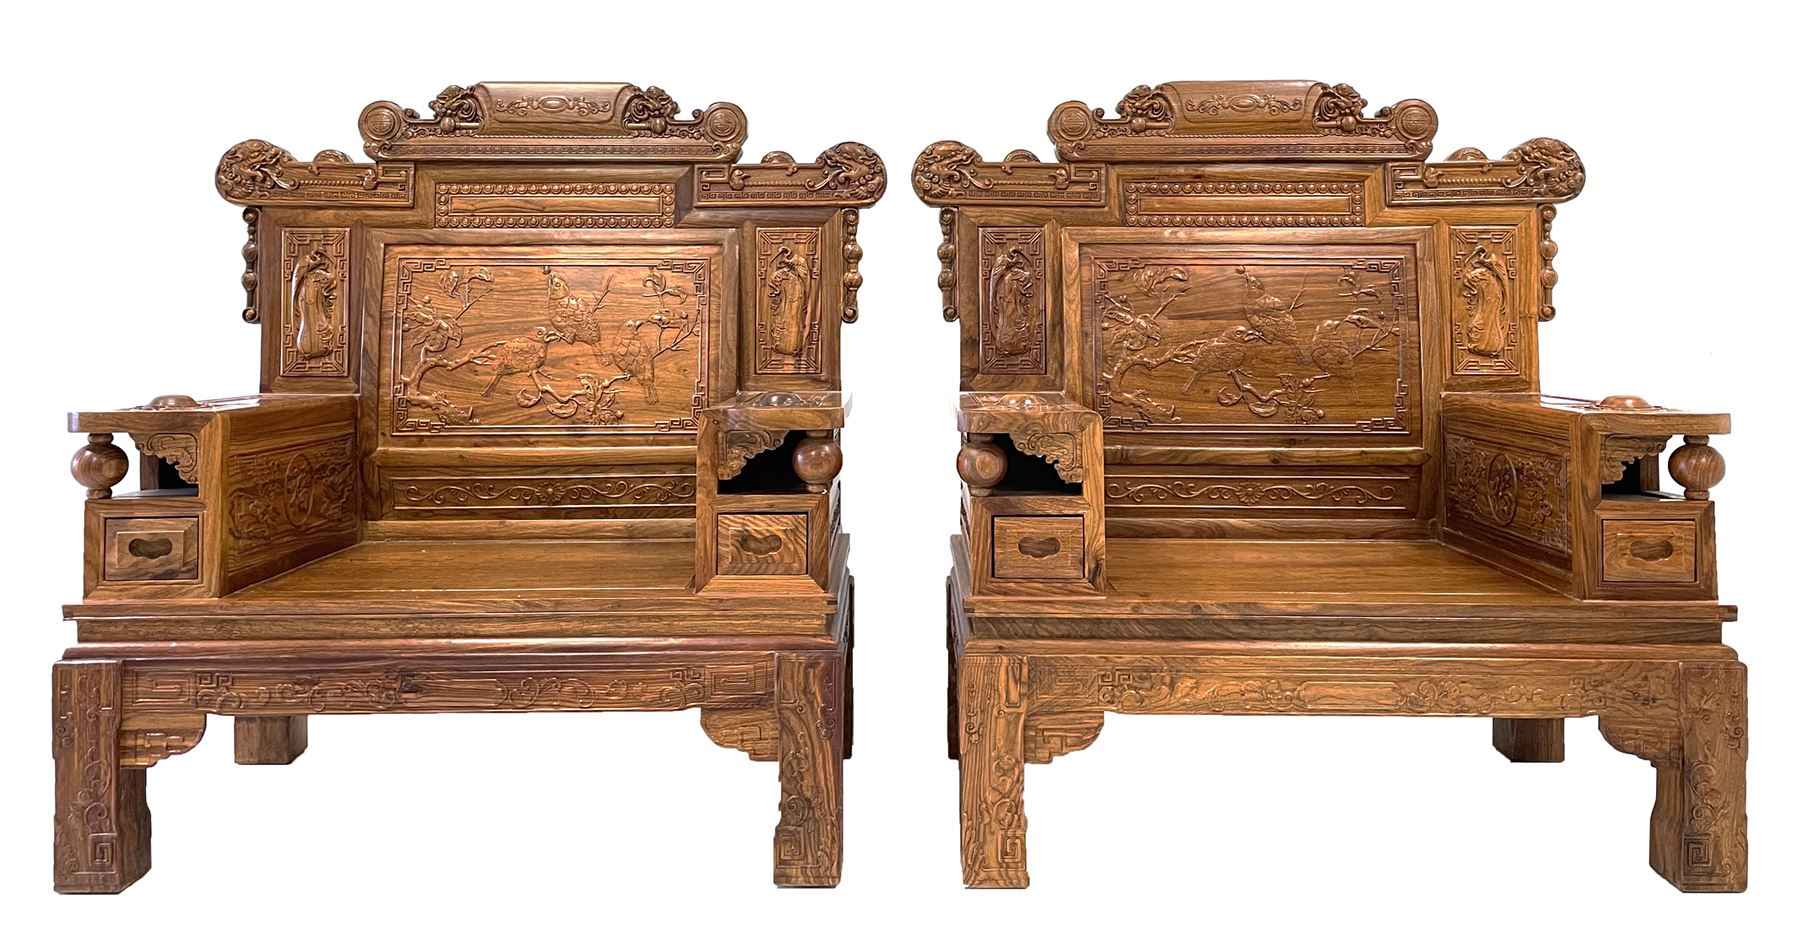 A Pair Chinese Imperial style hardwood throne chairs, the backs carved with dragon masks and birds